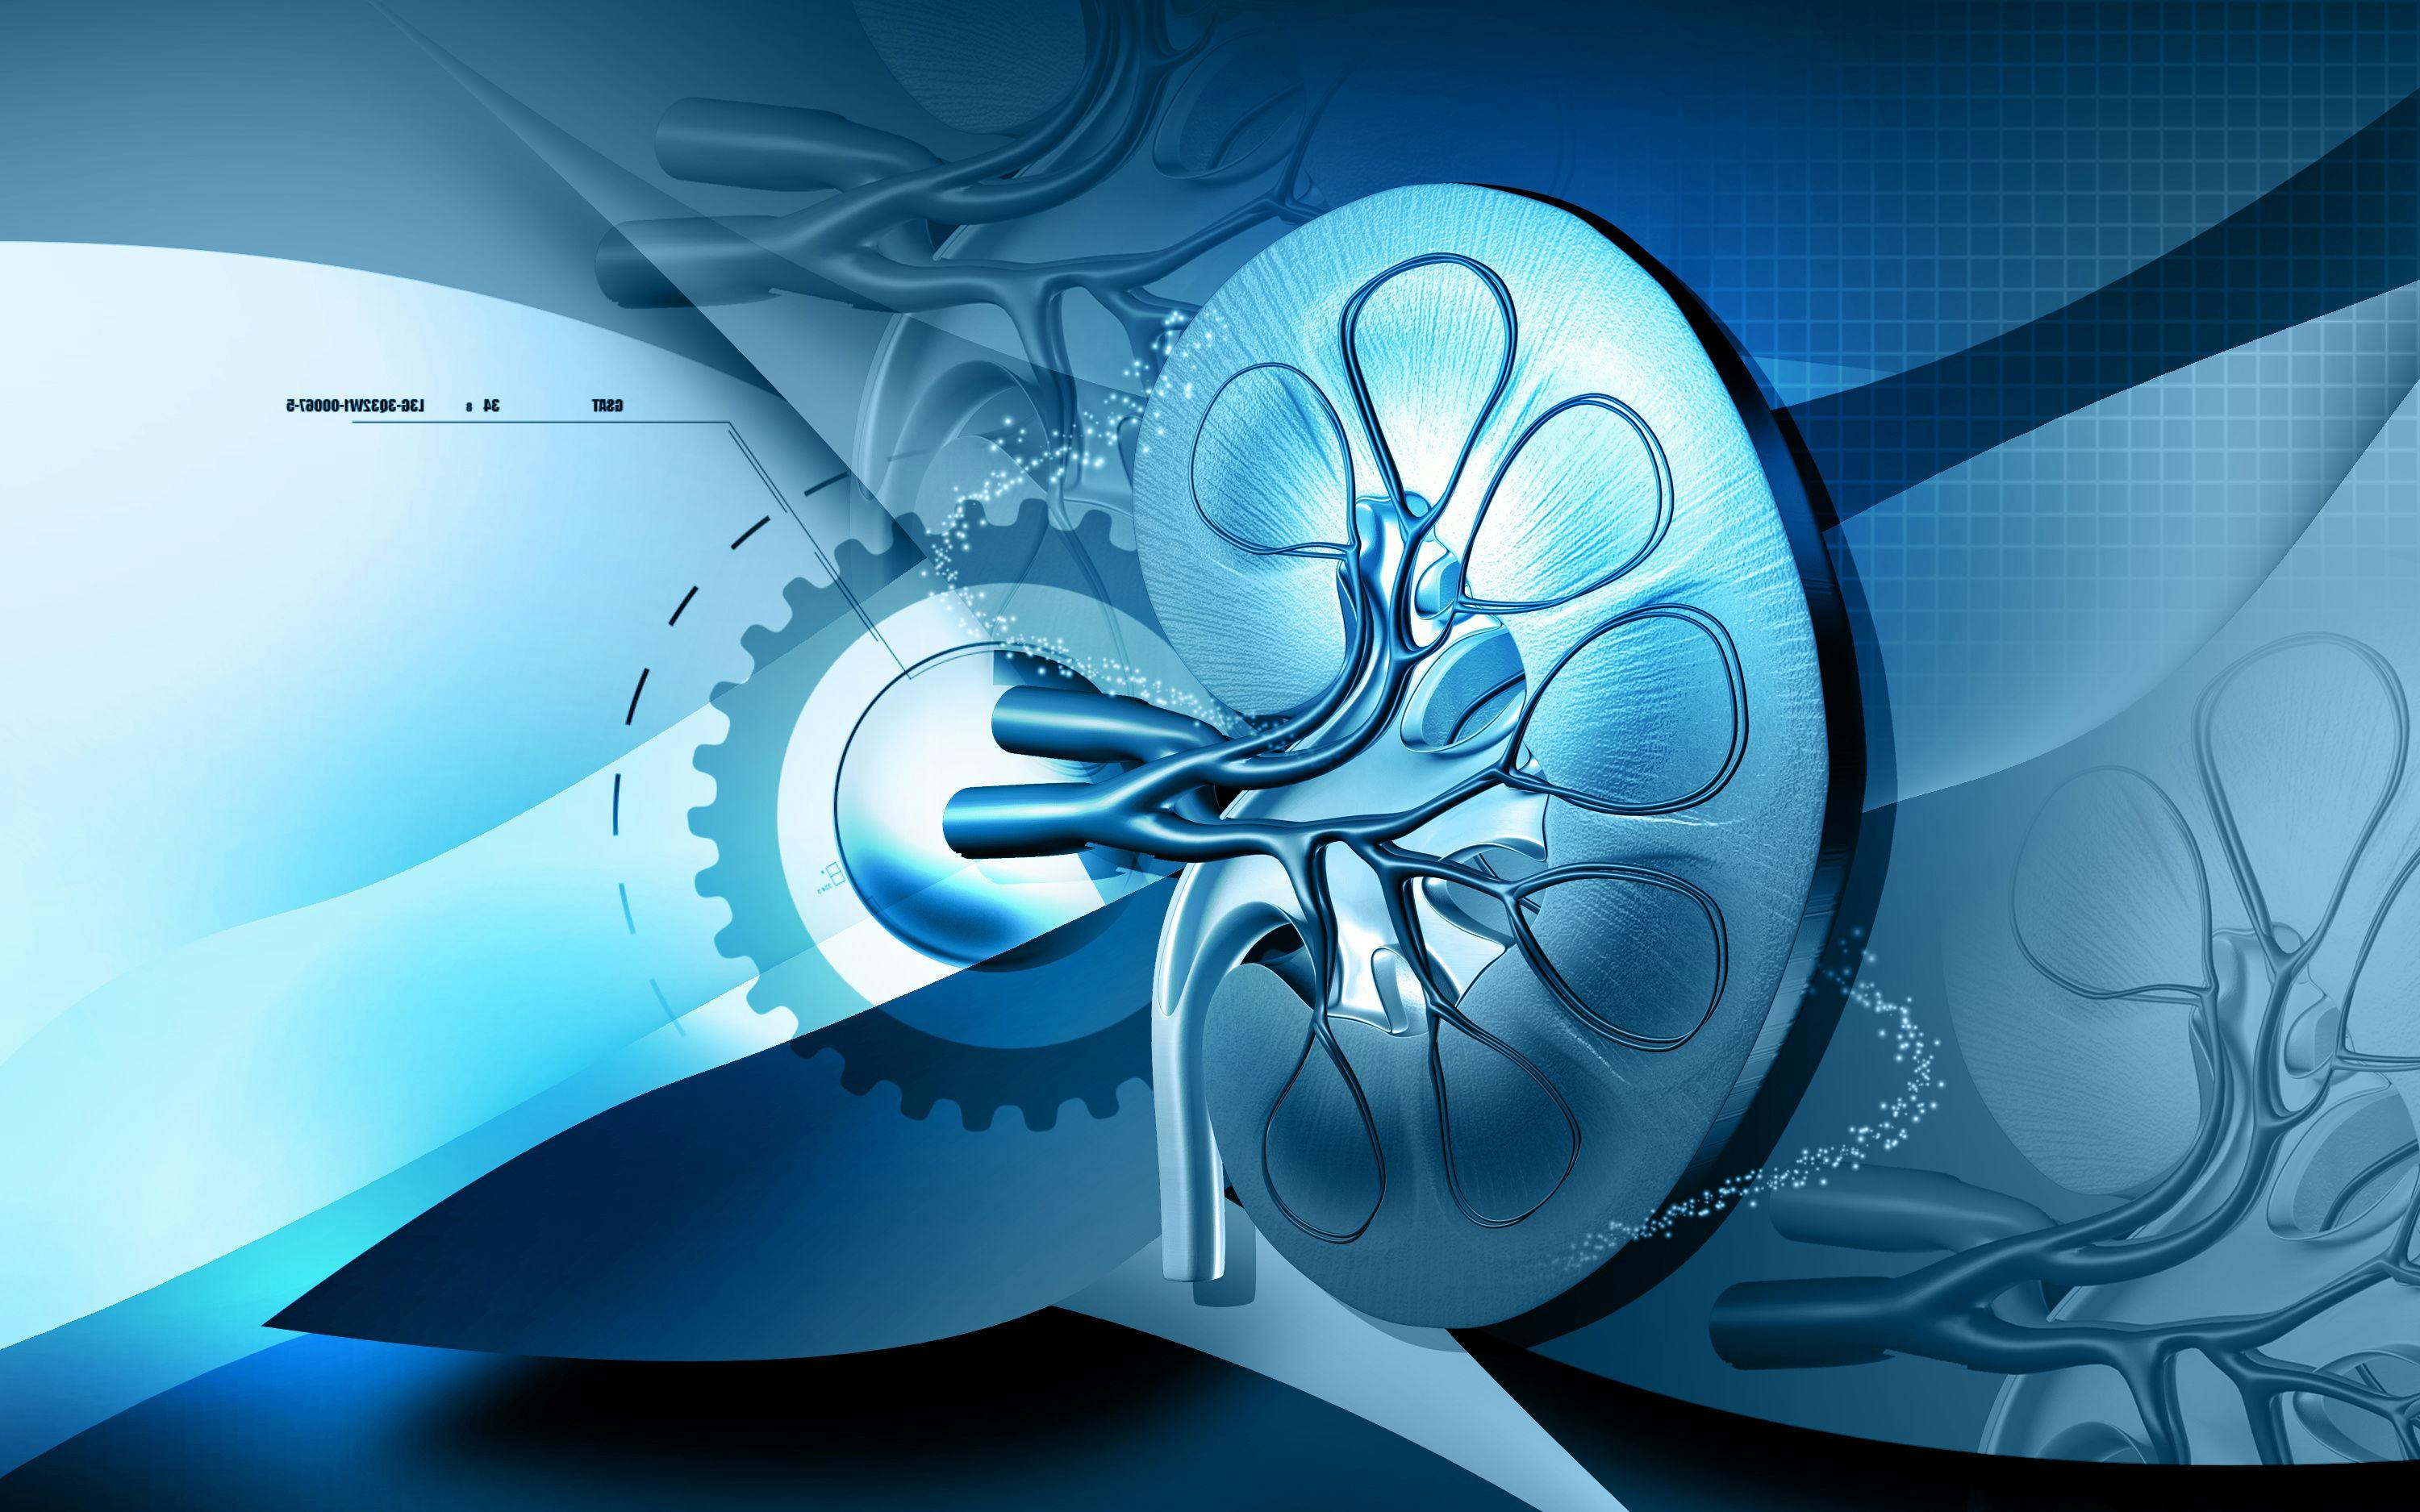 image of a kidney surrounded by a superimposed over a clip art image of a cog